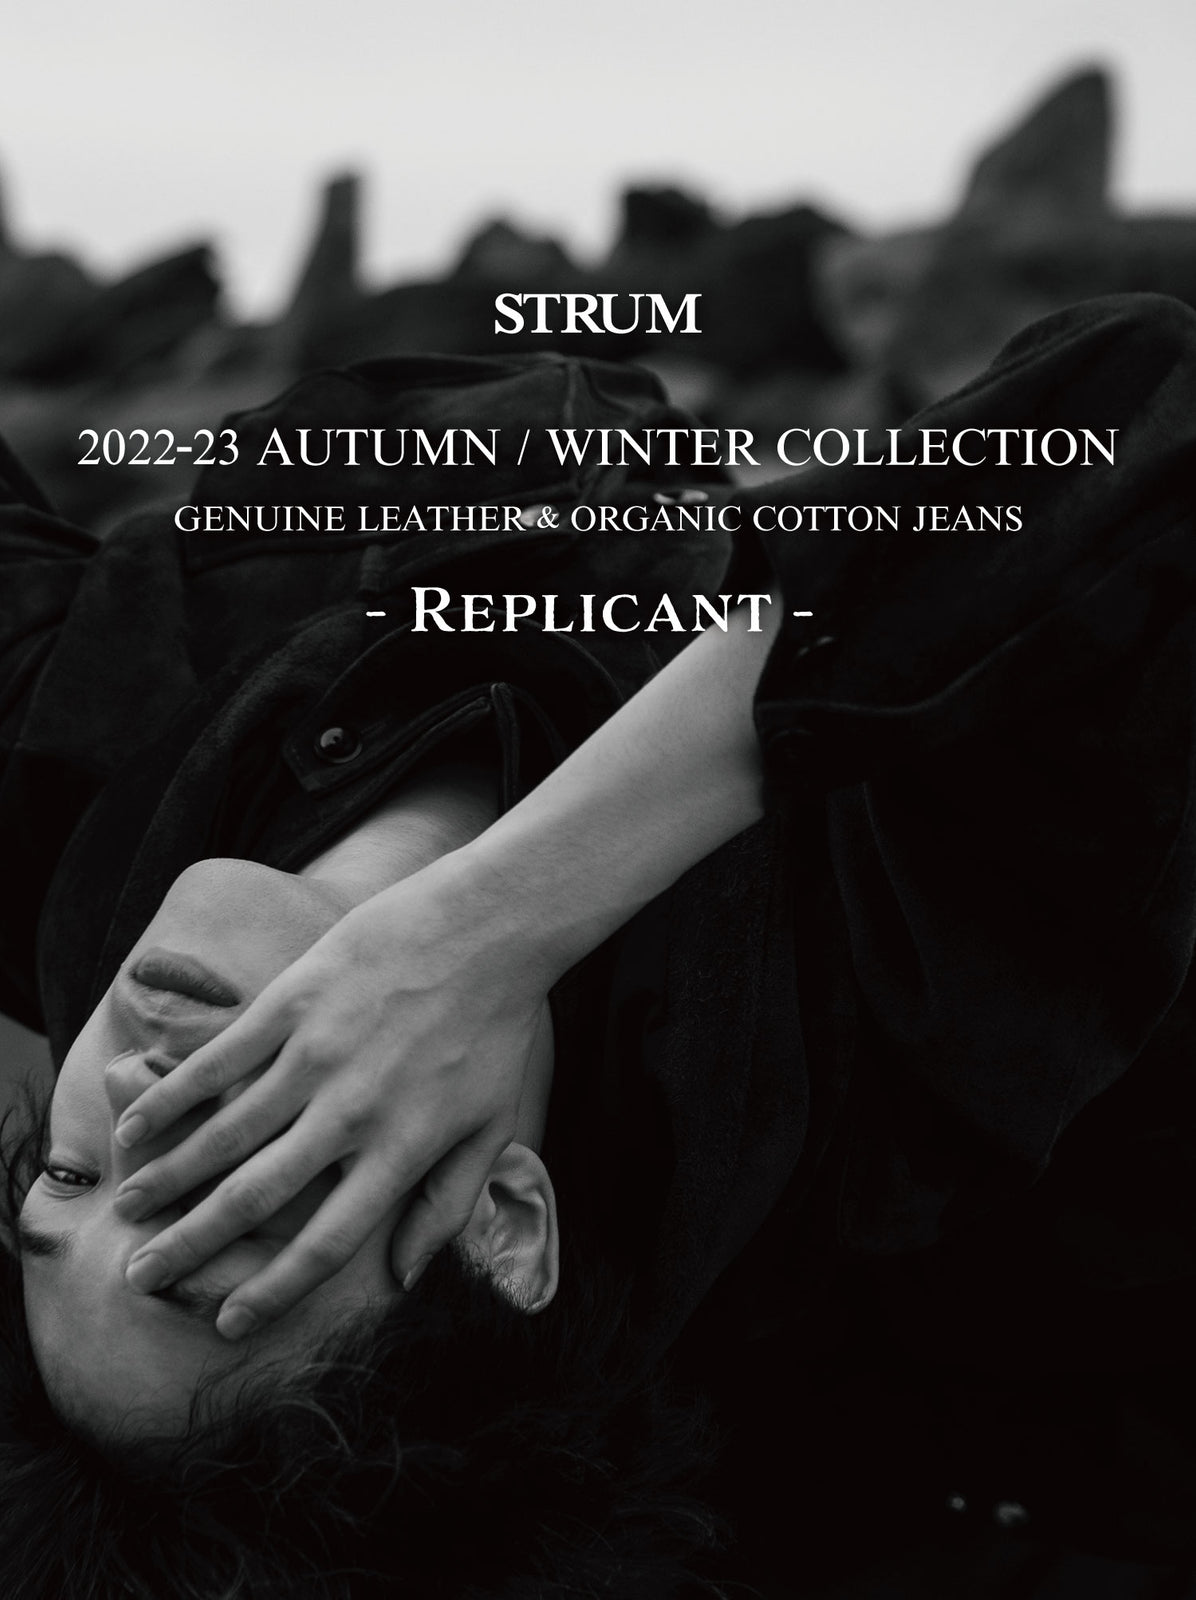 STRUM" 2022-23 AUTUMN / WINTER COLLECTION - Replicant - Image Photo #2 is now available!